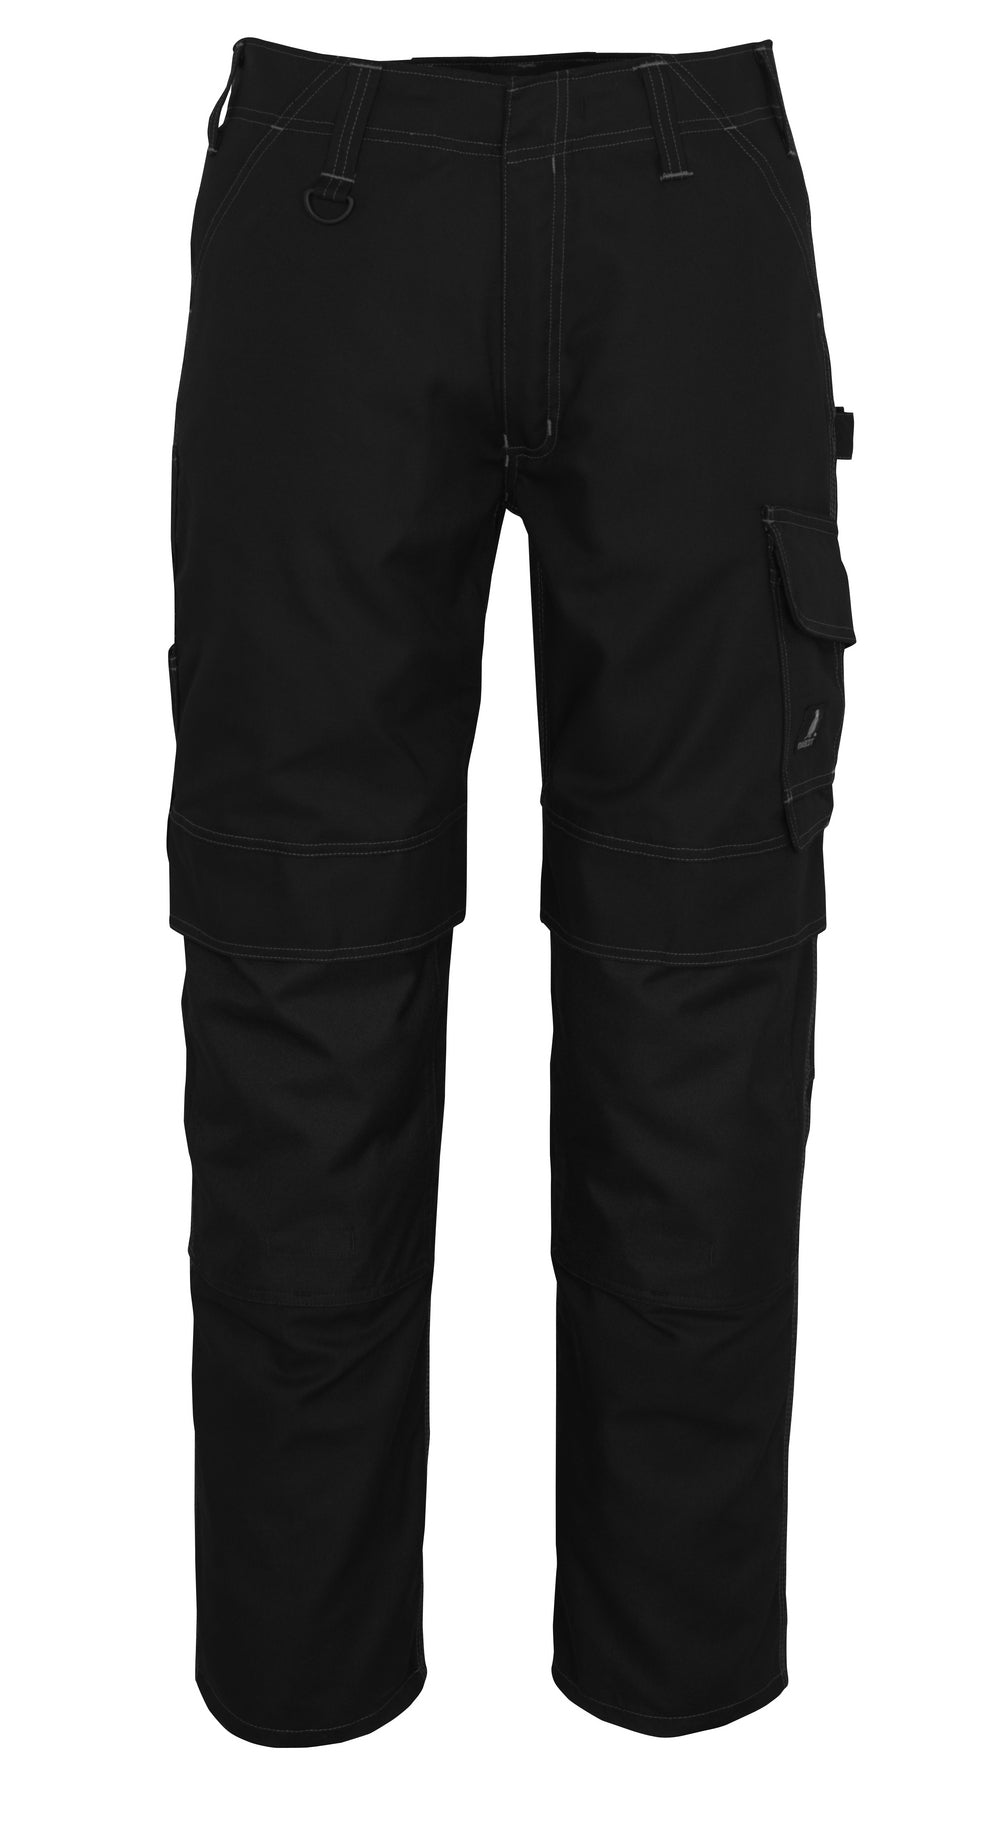 MASCOT®INDUSTRY Trousers with kneepad pockets Houston 10179 - DaltonSafety